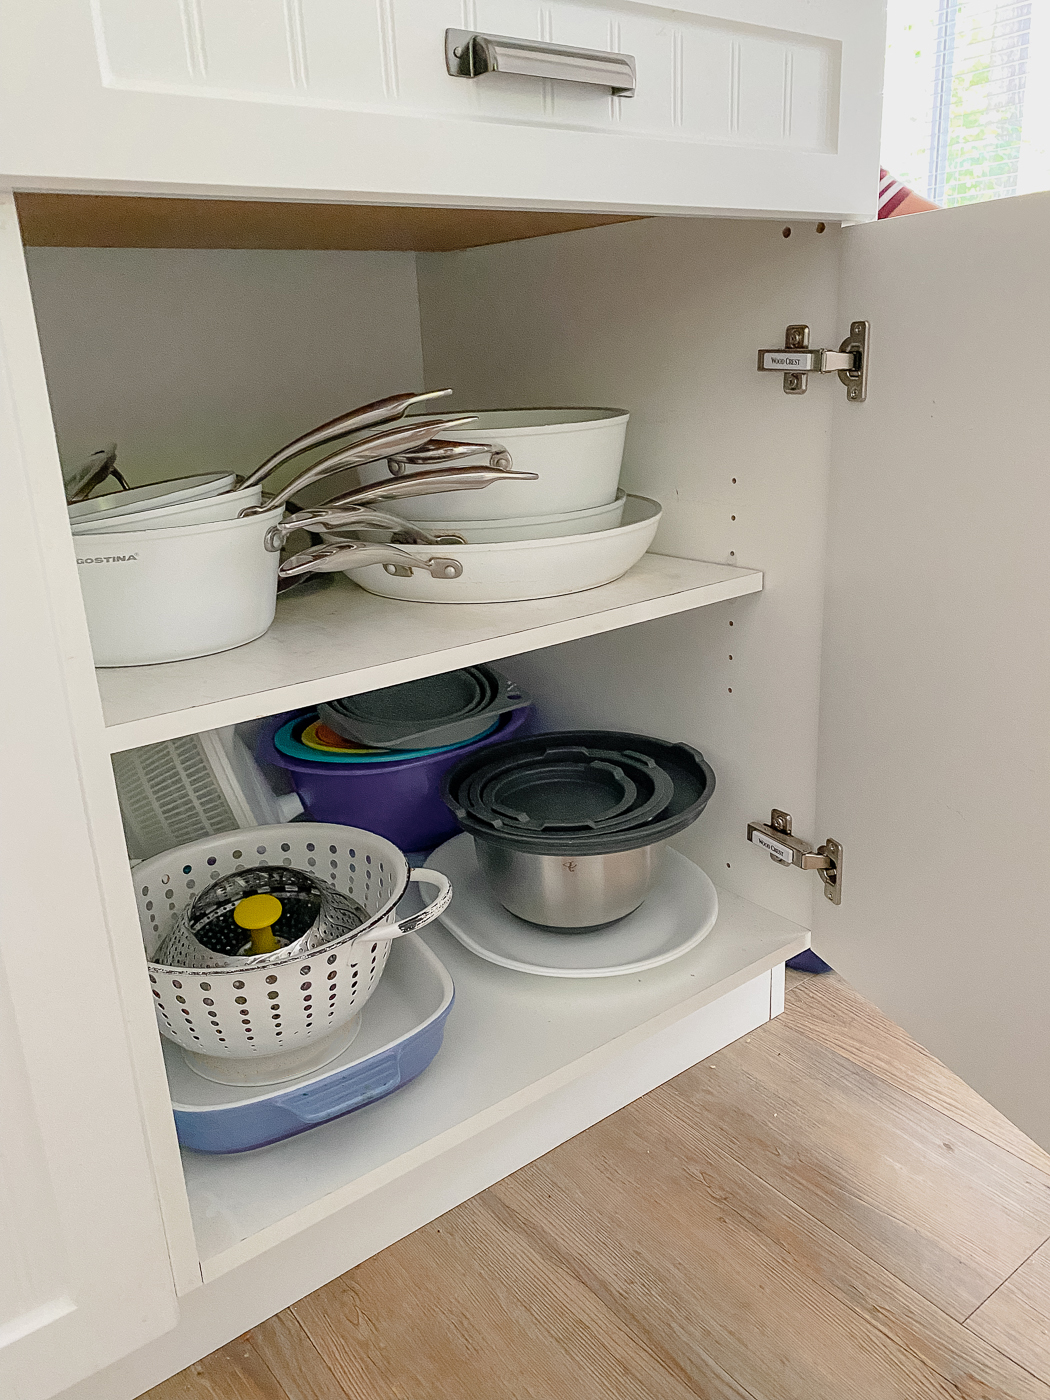 How to Organize Pots and Pans Kitchen Storage Ideas